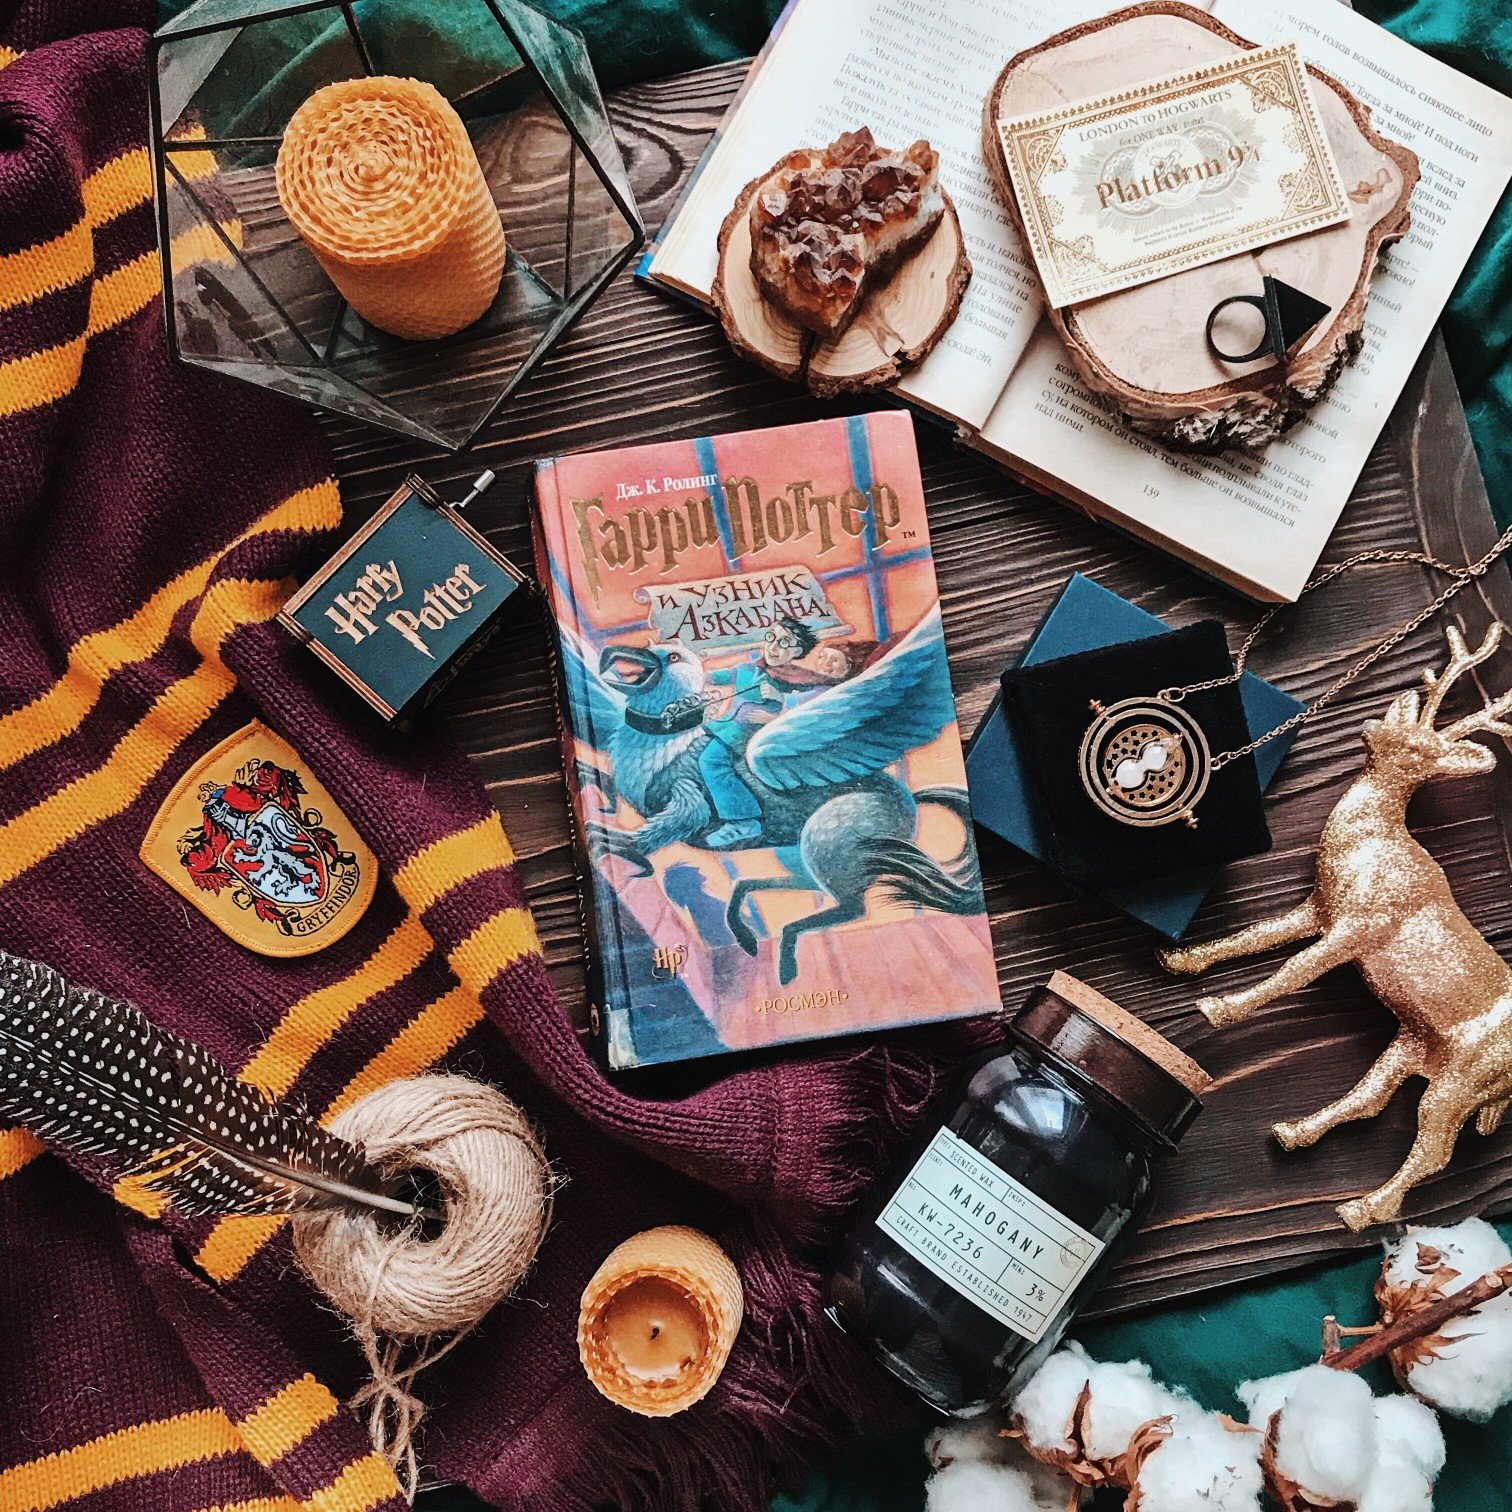 The Wizarding World of Harry Potter Mystery Box